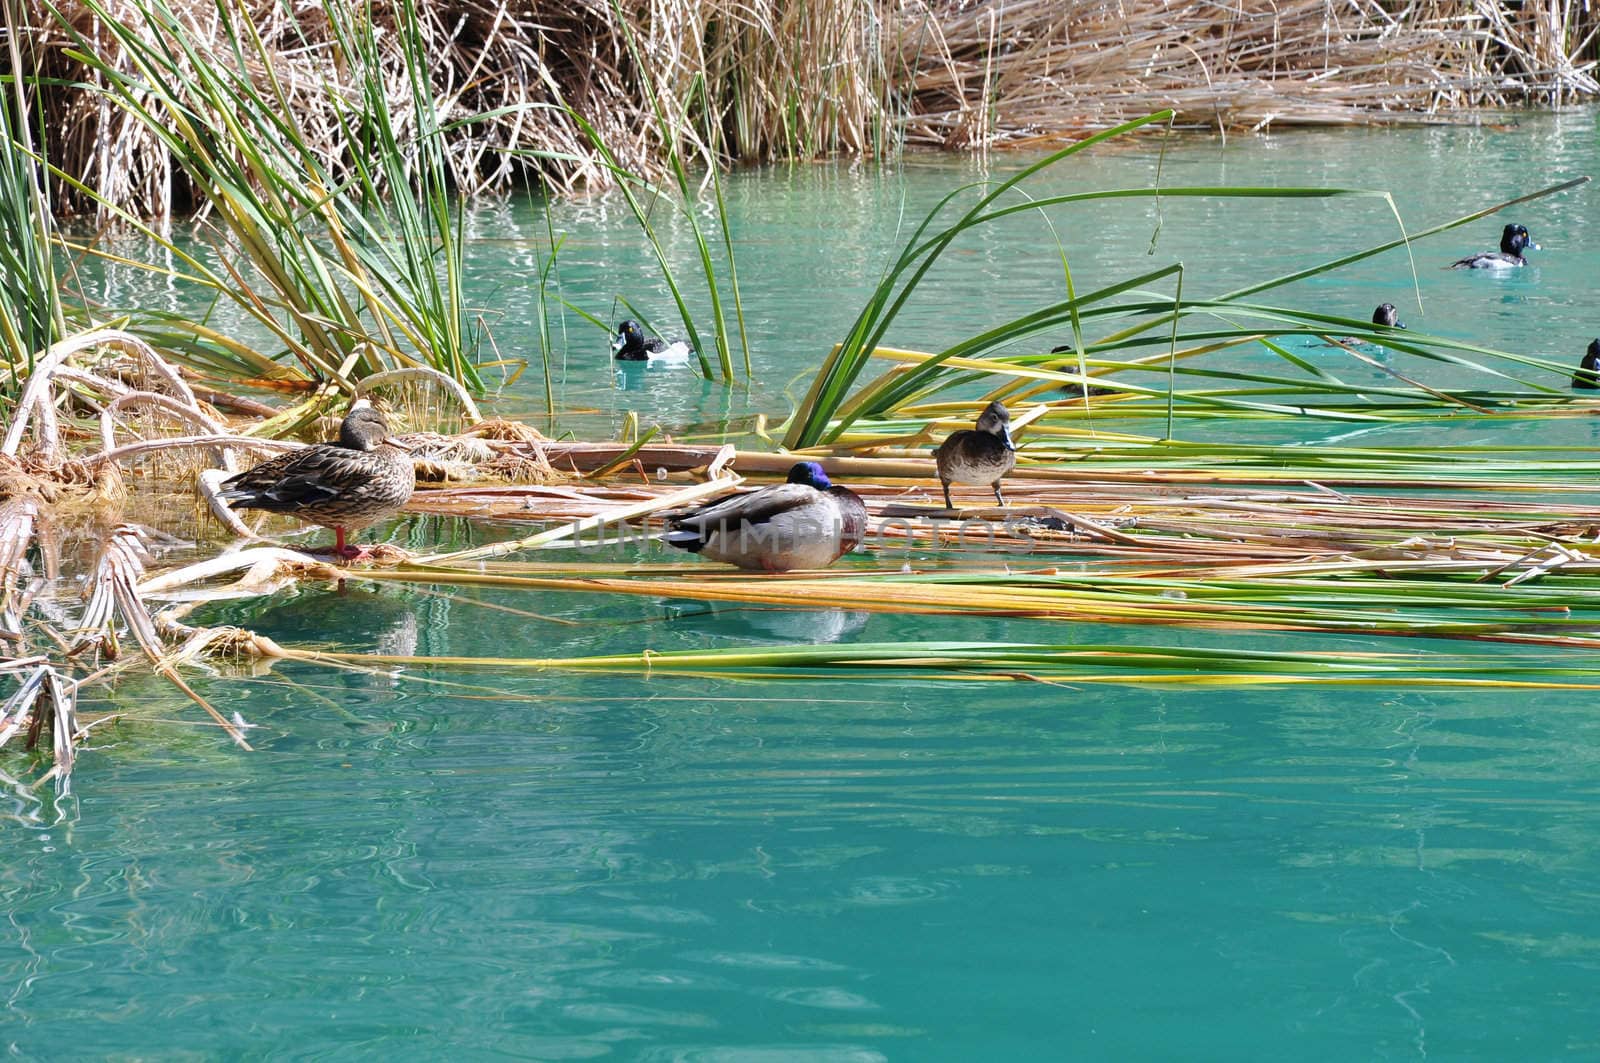 Ducks rest along the shoreline at a pond in Whitewater Canyon near the town of Palm Springs, California.